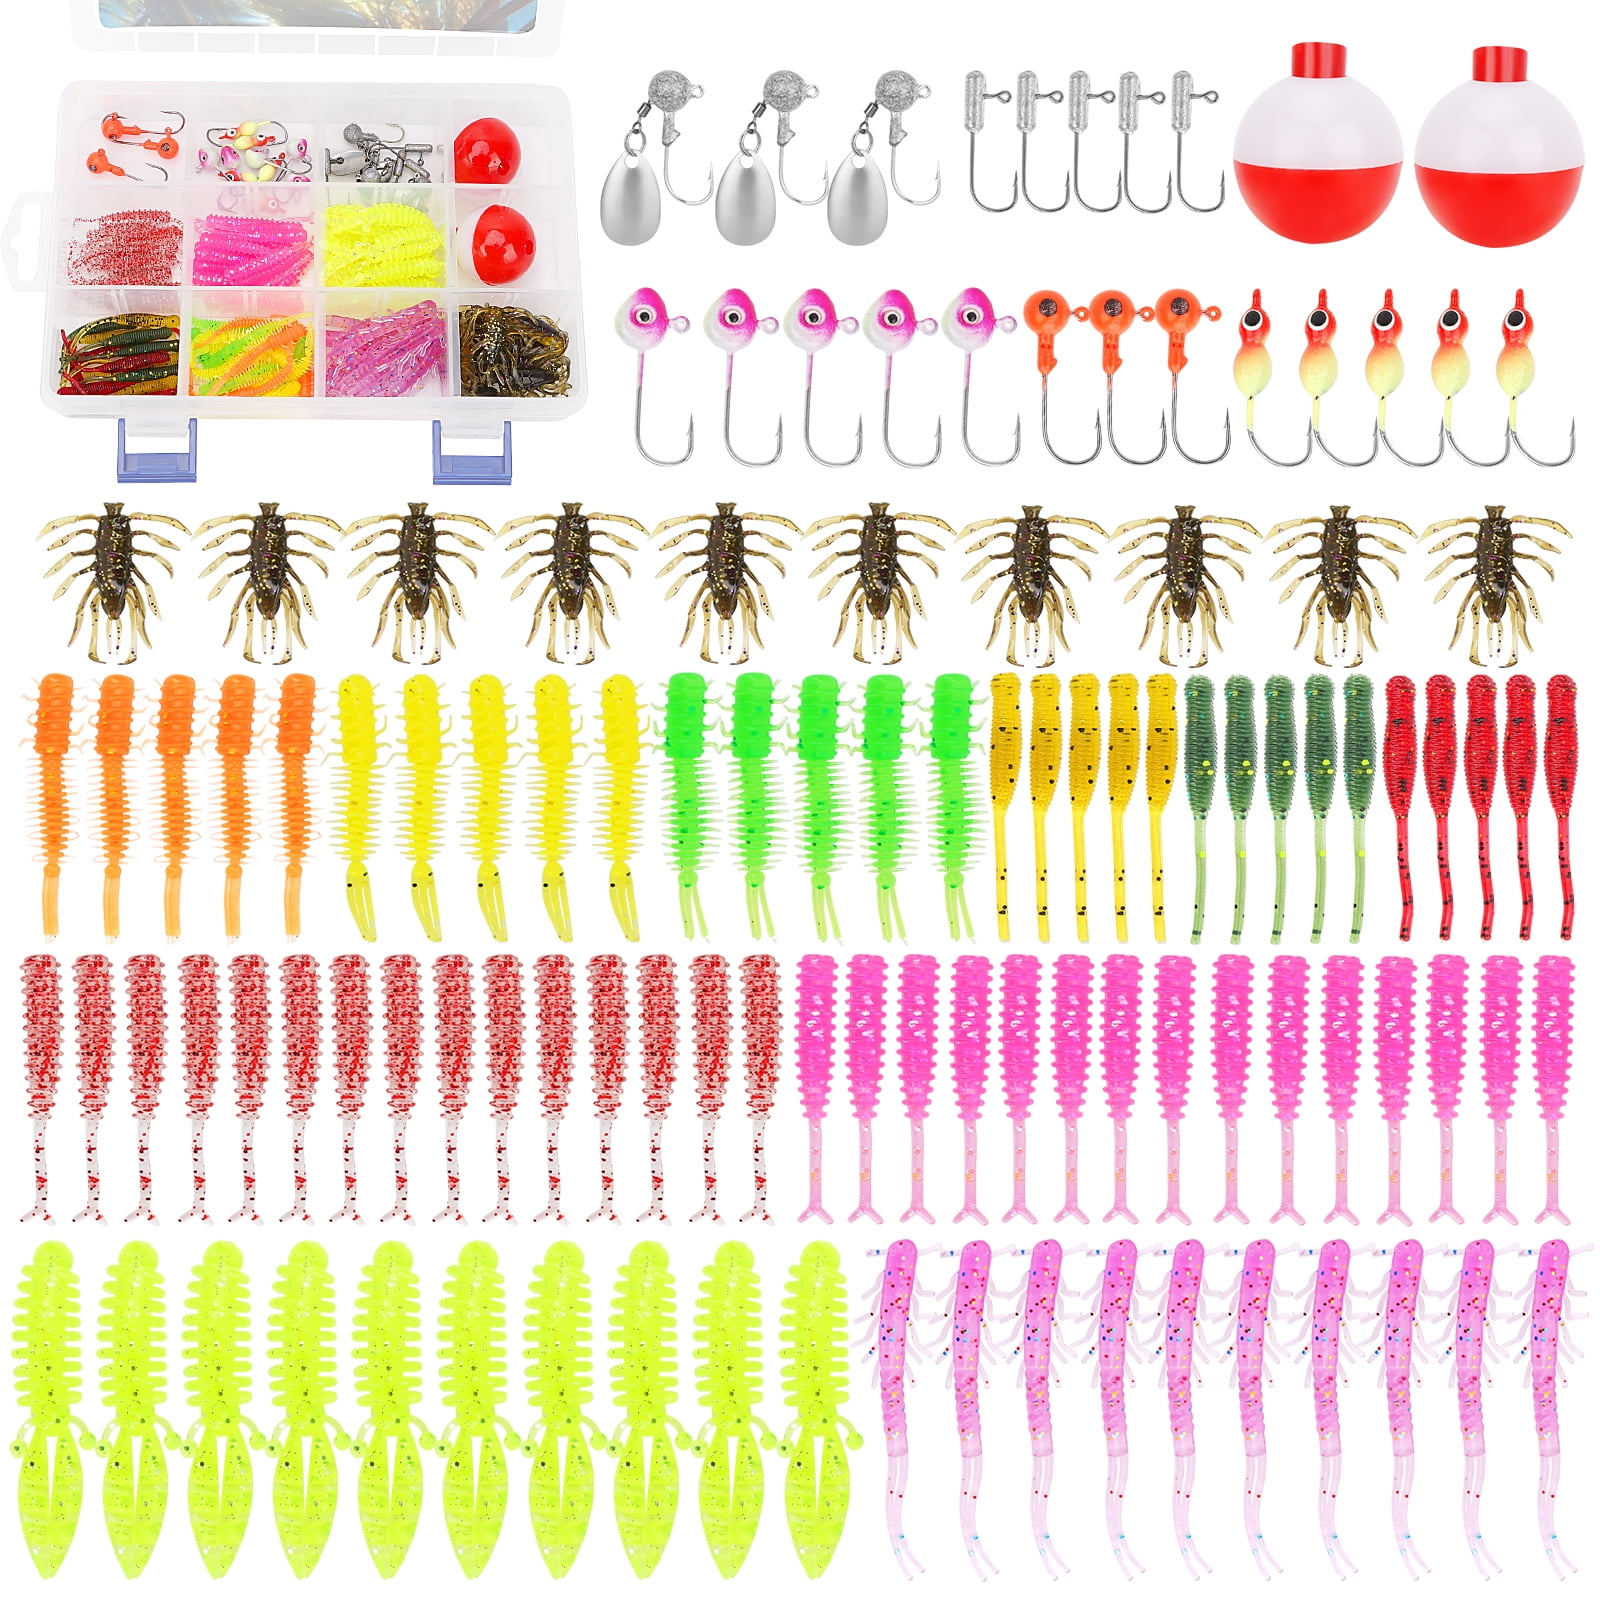 Fishing Lures Tackle Box Trout & Crappie Ice Fishing Dominican